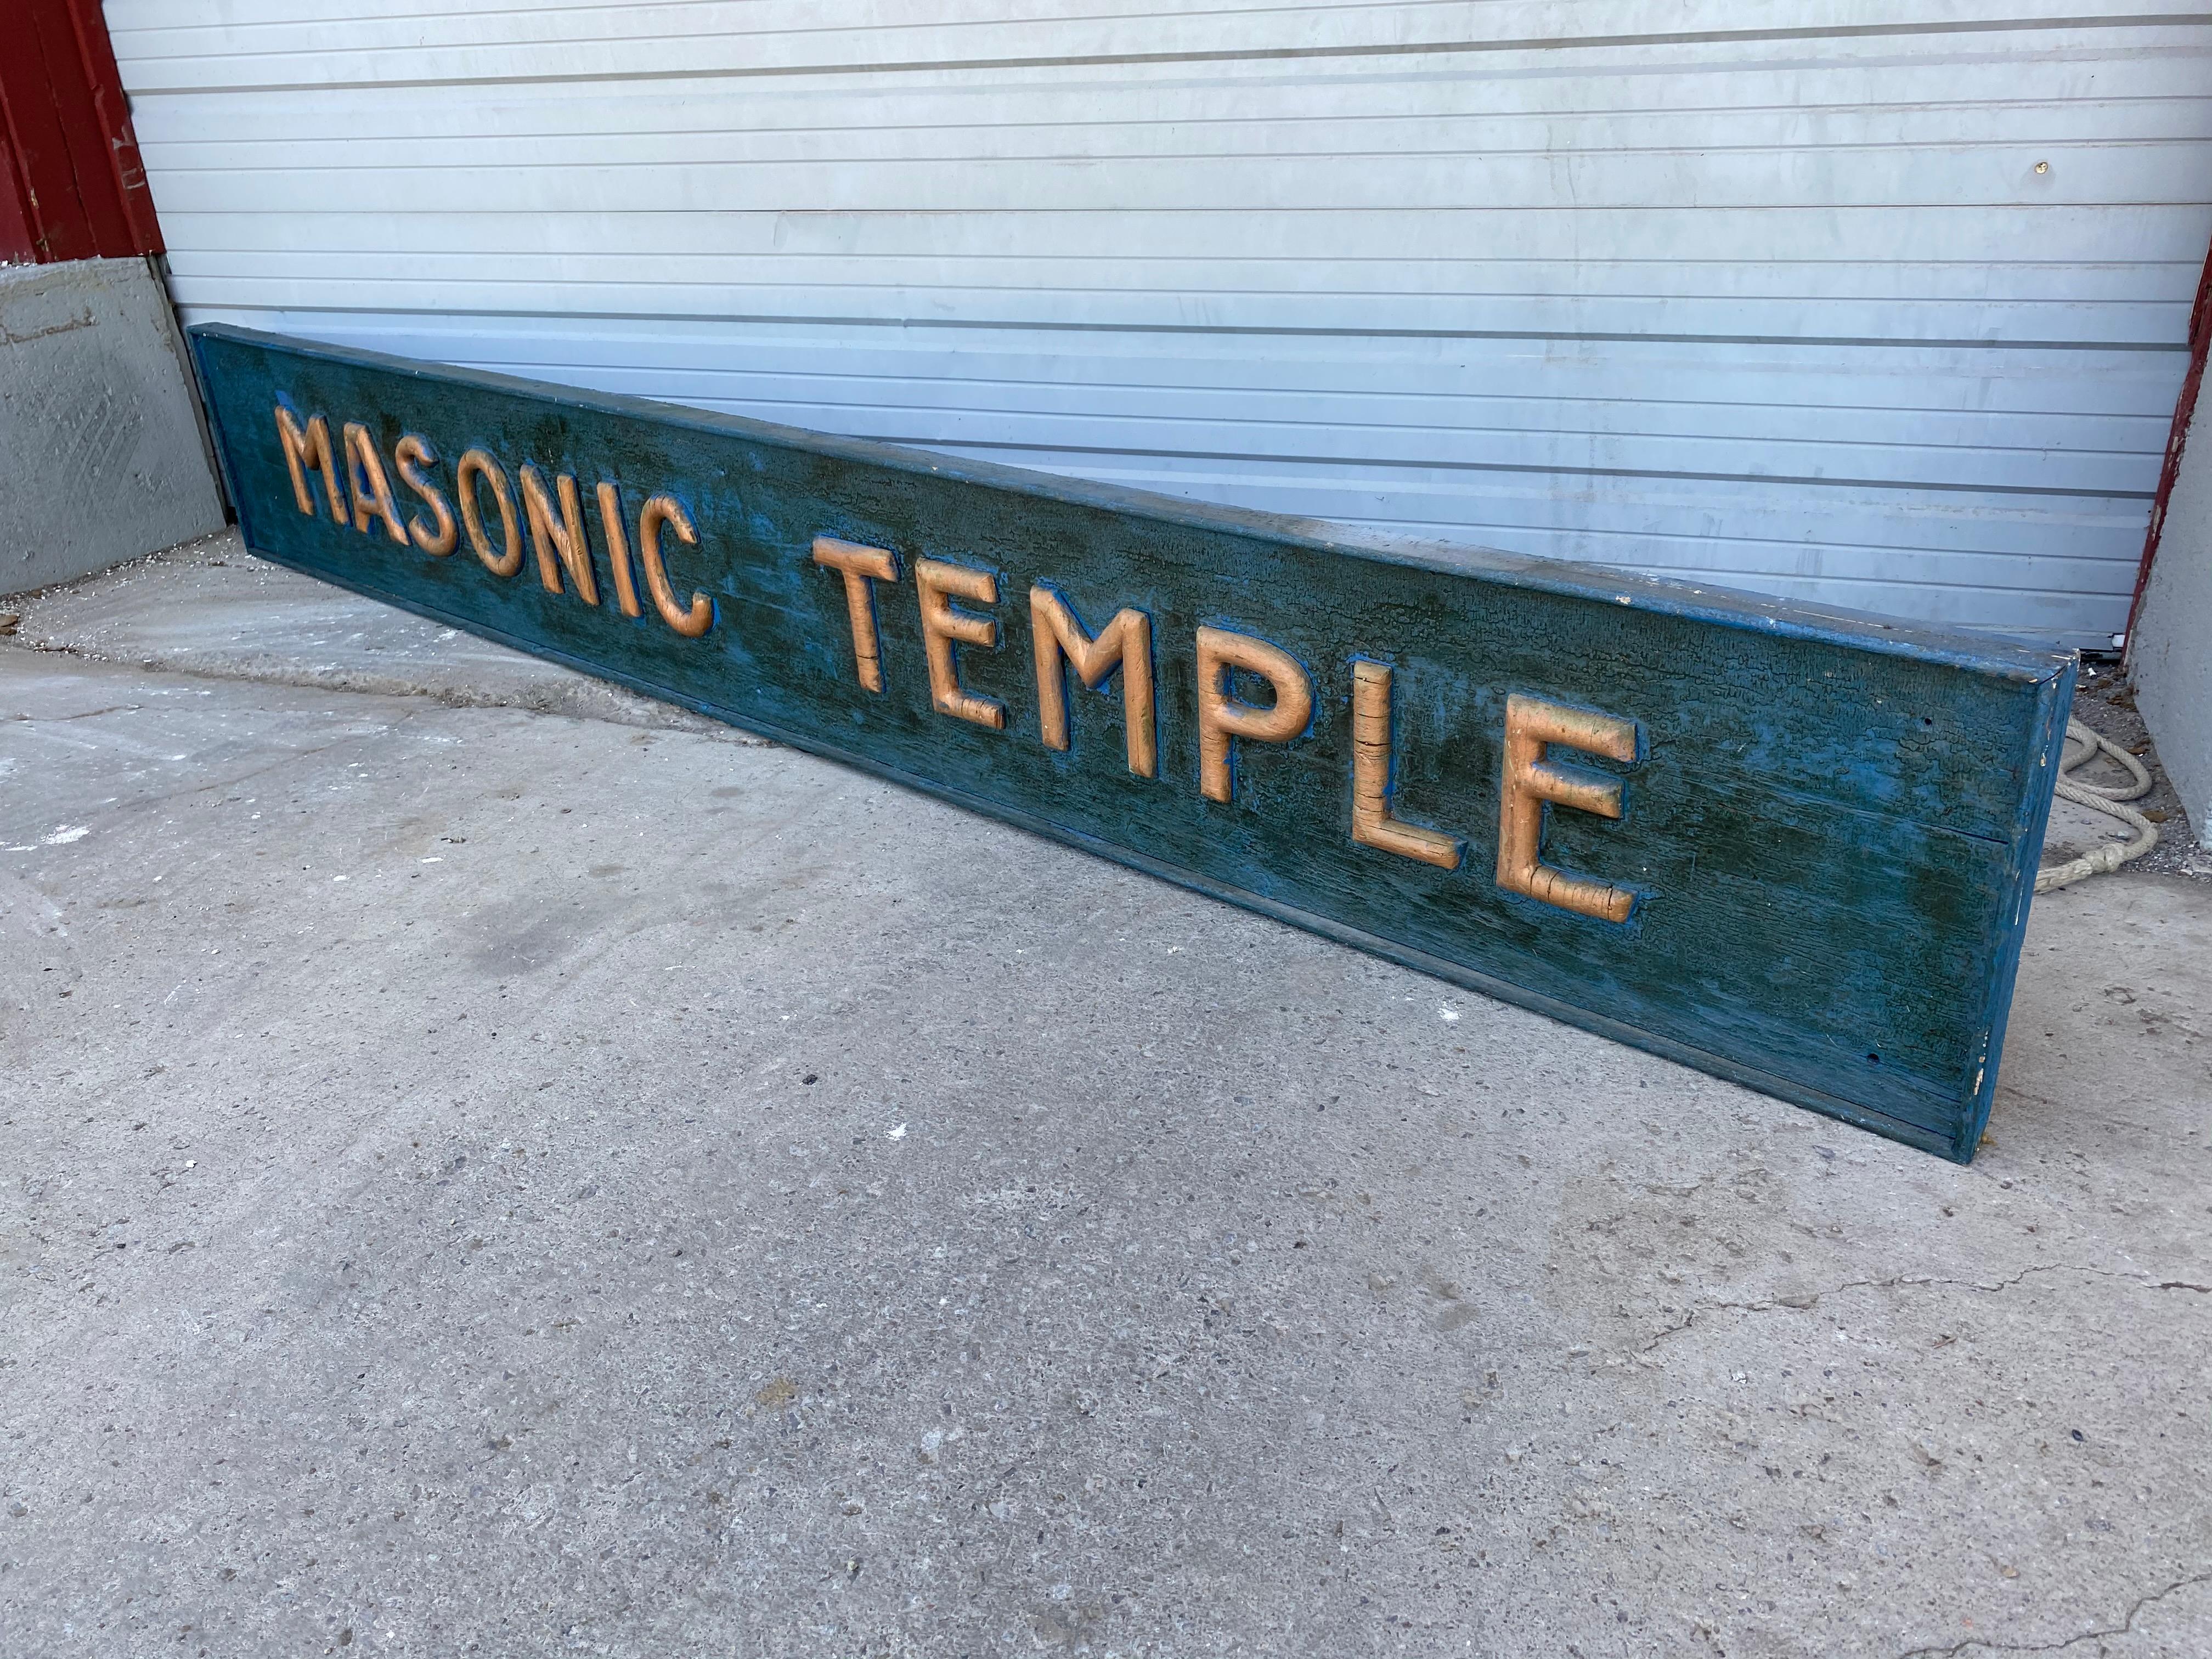 American Large Antique Handcrafted Folk Art Sign ..MASONIC TEMPLE, Raised Letters For Sale